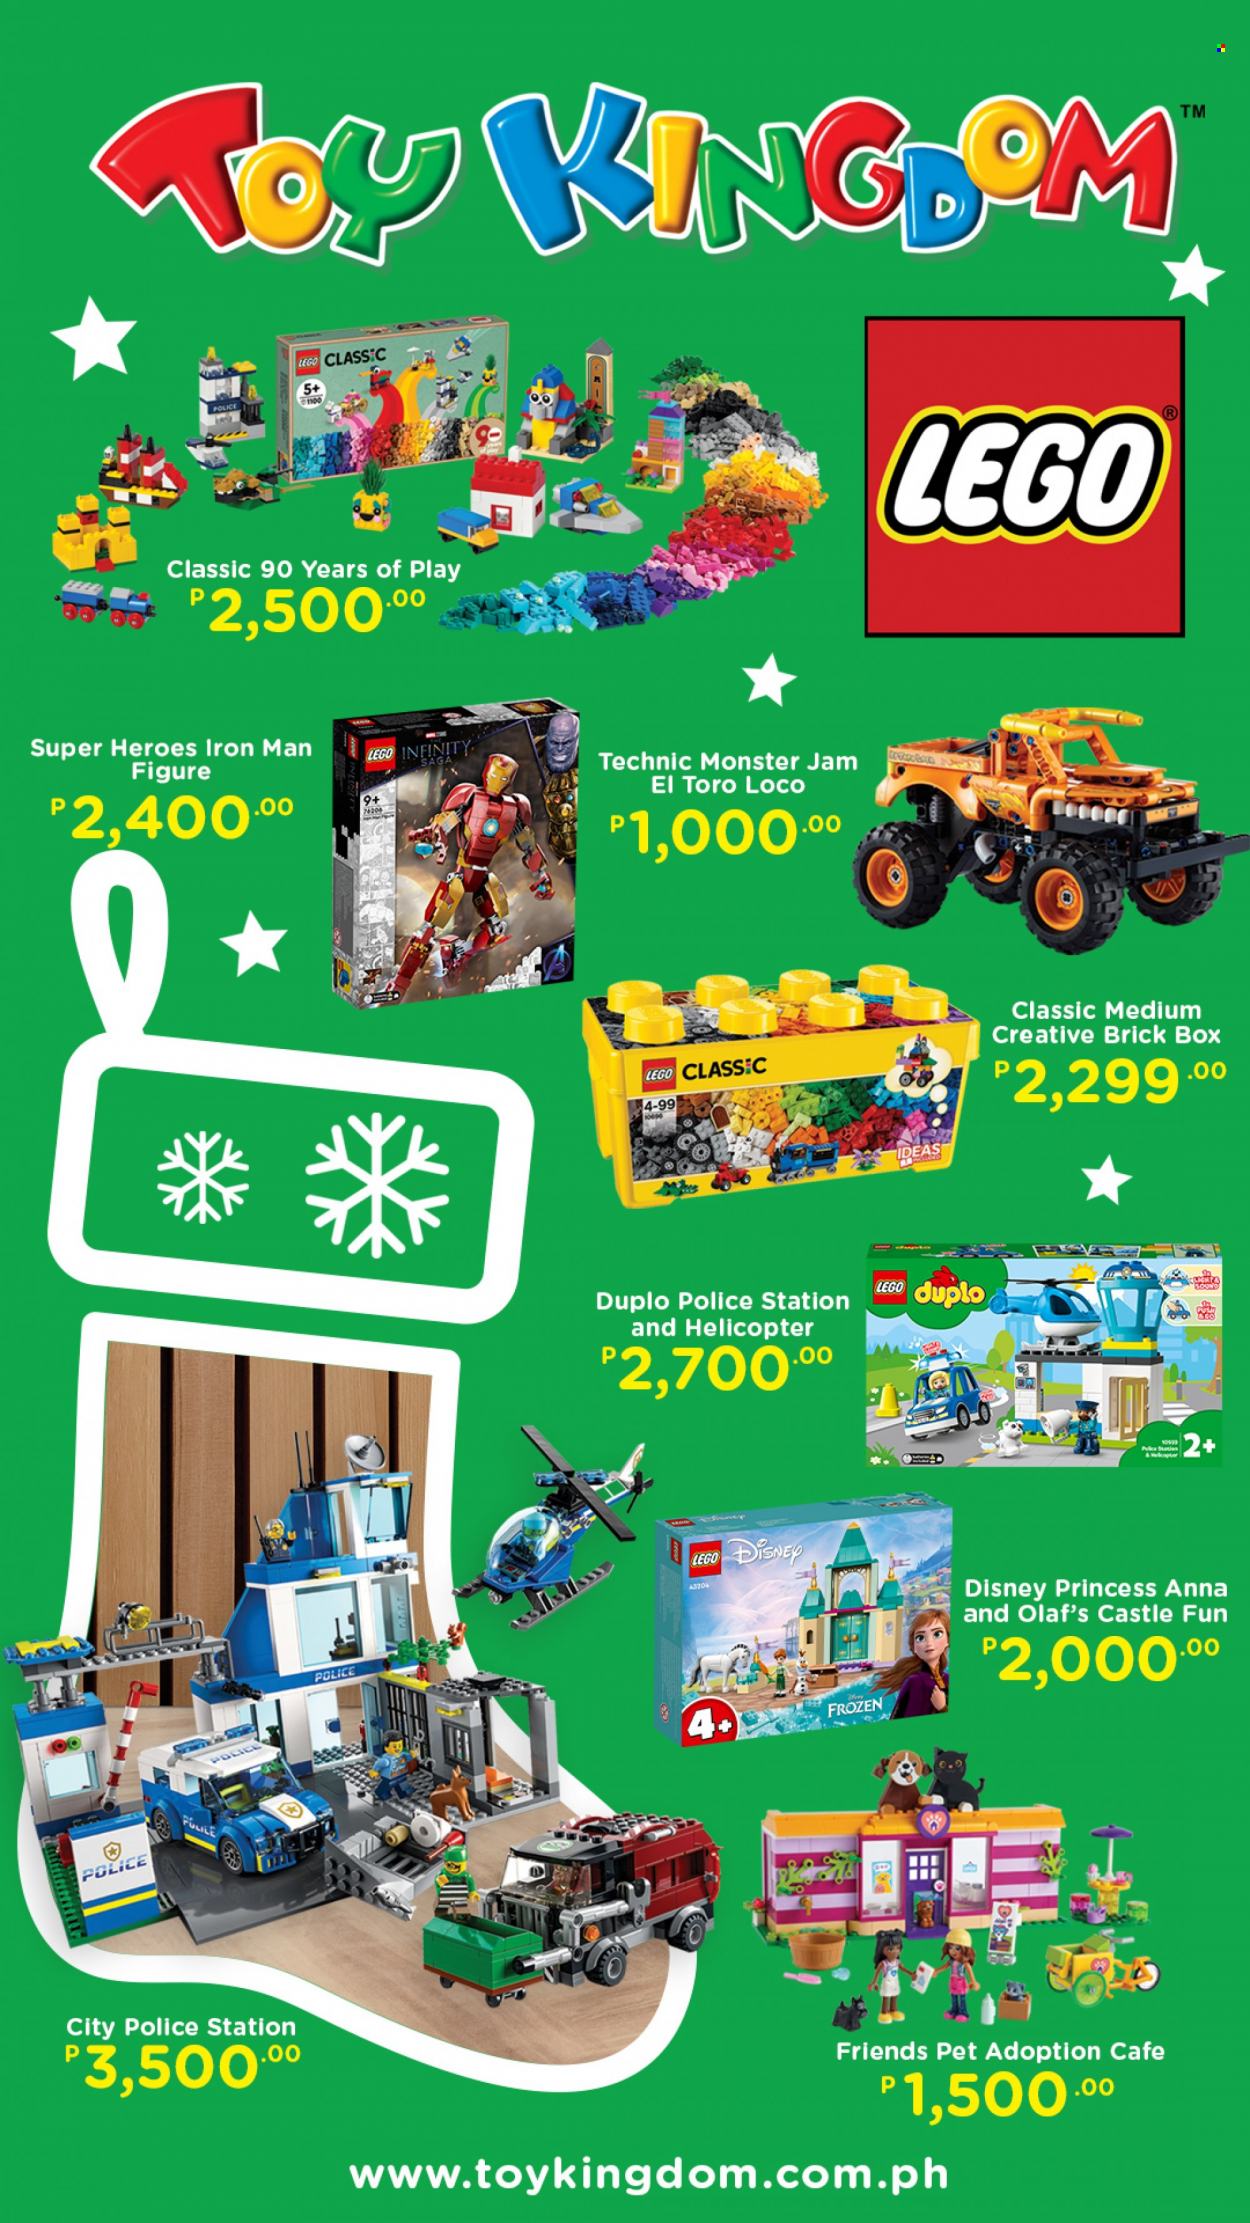 thumbnail - Toy Kingdom offer  - Sales products - Disney, LEGO, LEGO Duplo, toys, Monster, helicopter, Super Heroes, princess, LEGO Classic. Page 2.